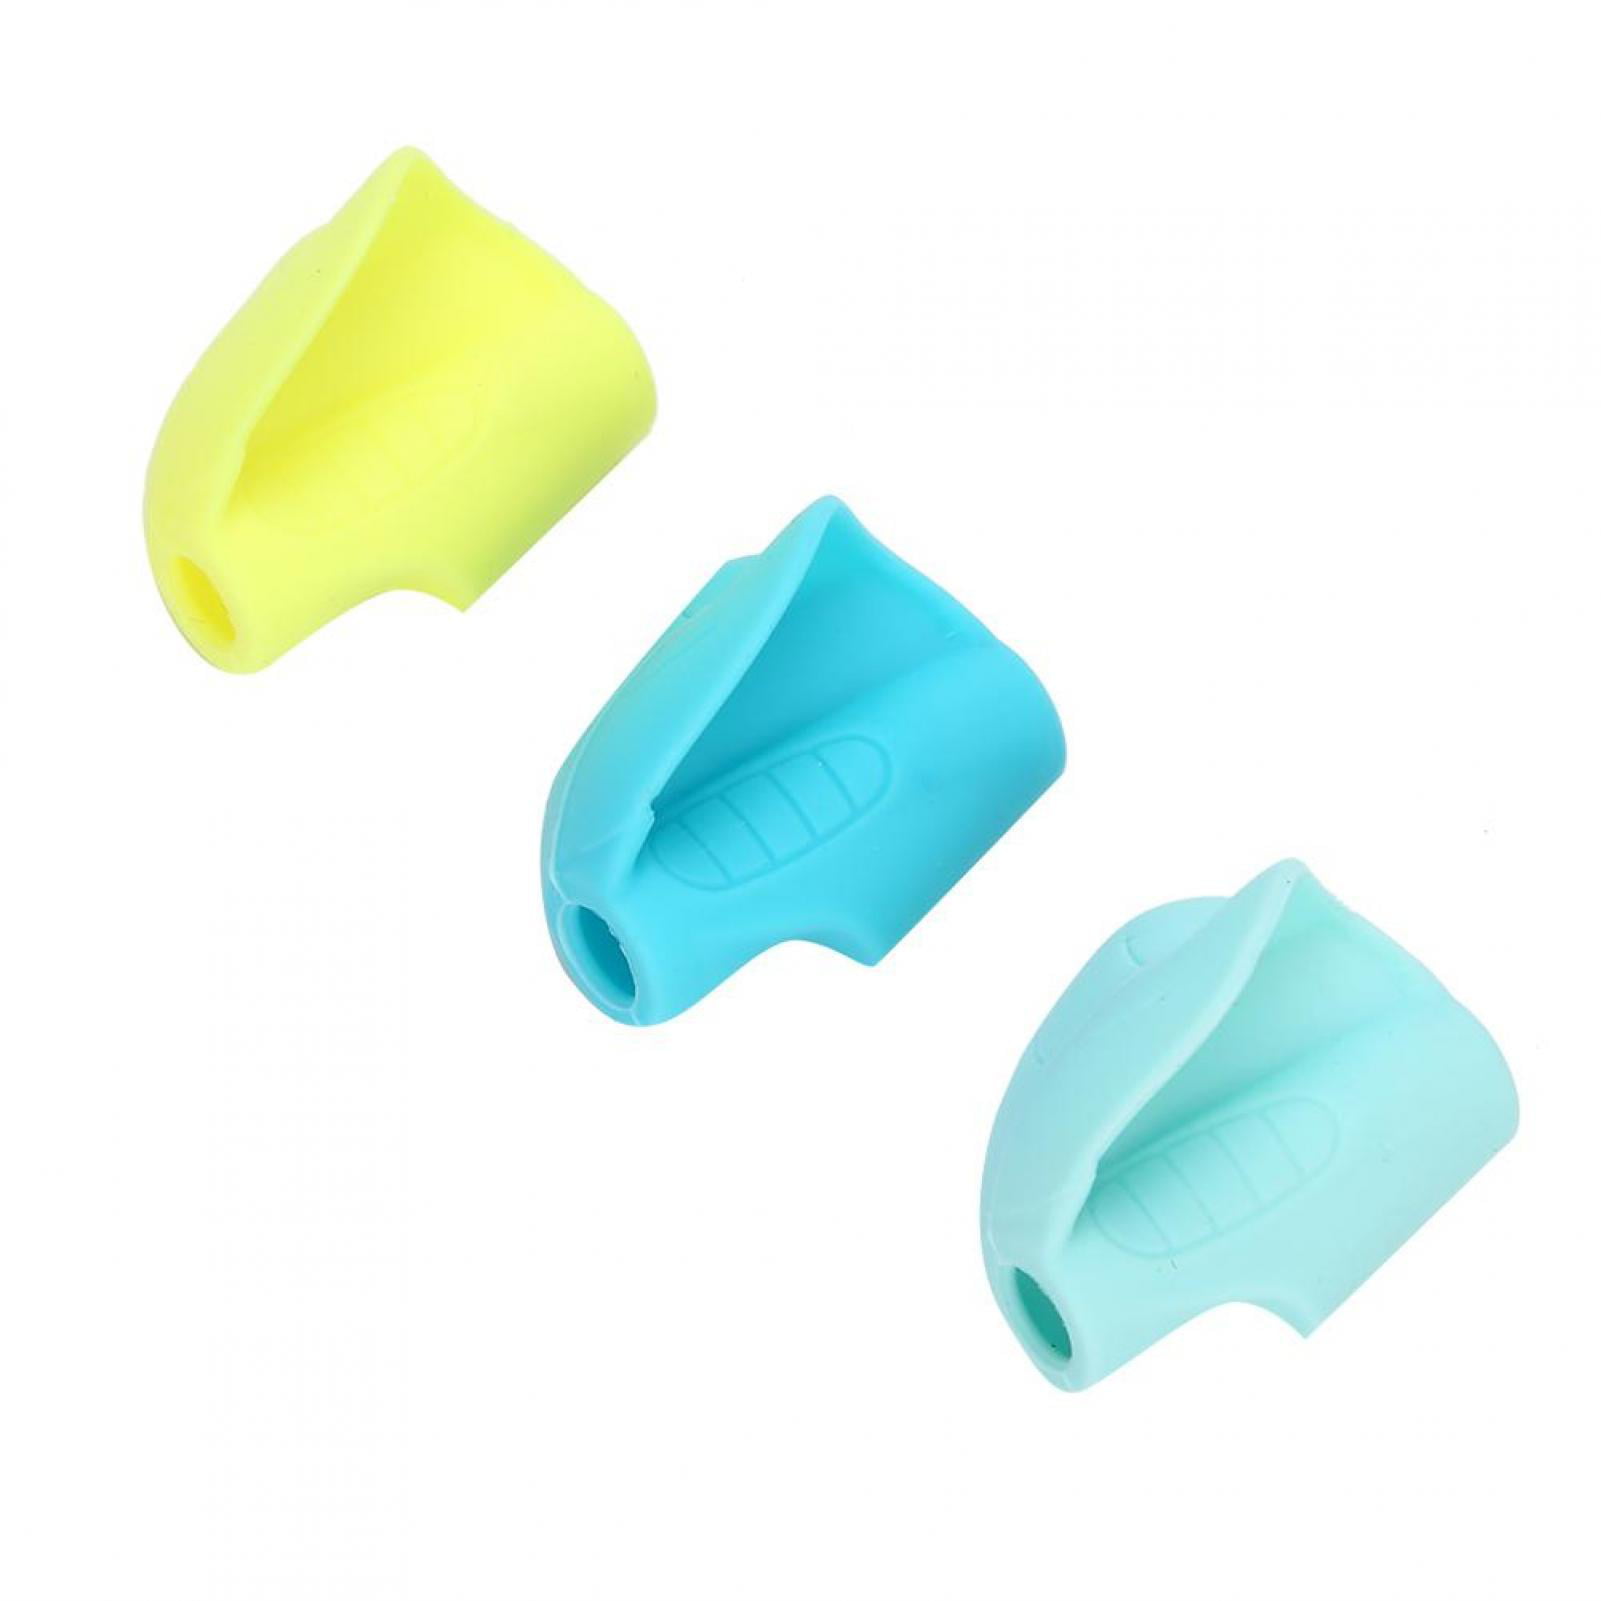 3x 2/3-finger Grip Writing Tool Silicone Kid Baby Pen Pencil Holder Help Learn 